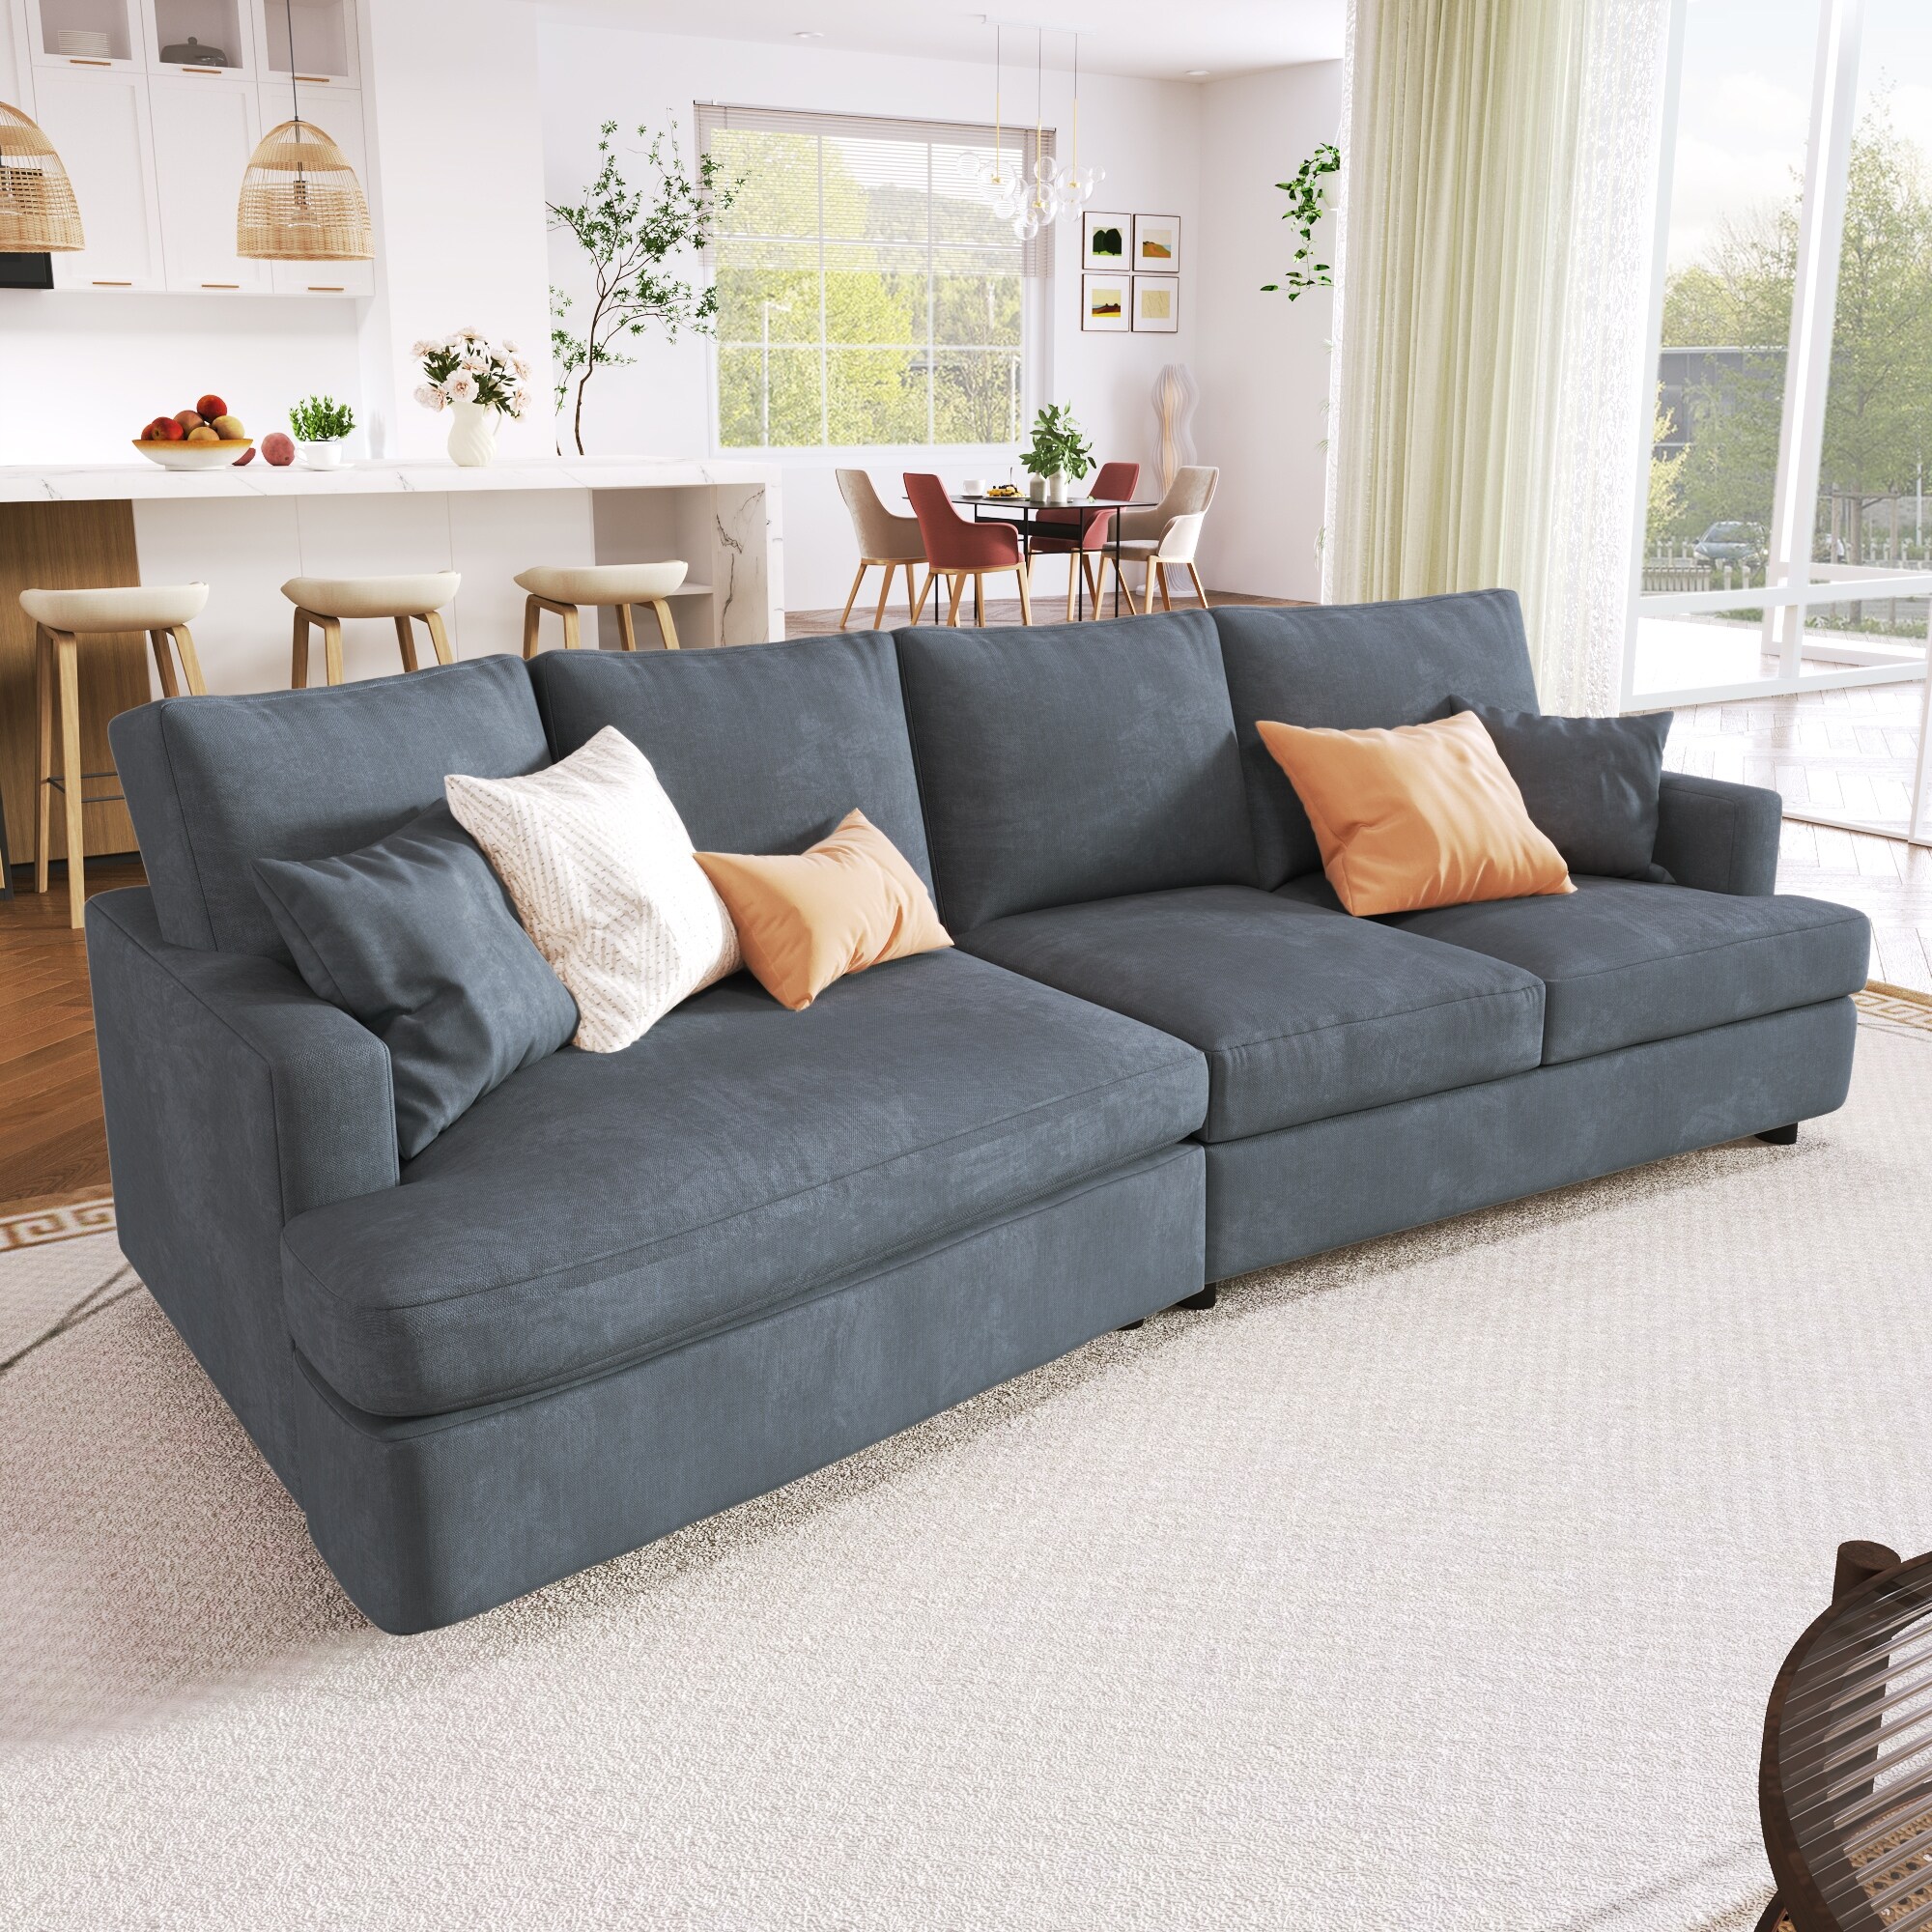 https://ak1.ostkcdn.com/images/products/is/images/direct/84a31b5100b4f303cd164a784b847049ab23ebfe/3-Seat-Streamlined-Sofa-with-Removable-Back-and-Seat-Cushions-and-2-pillows%2C-for-Living-Room%2C-Office%2C-Apartment.jpg